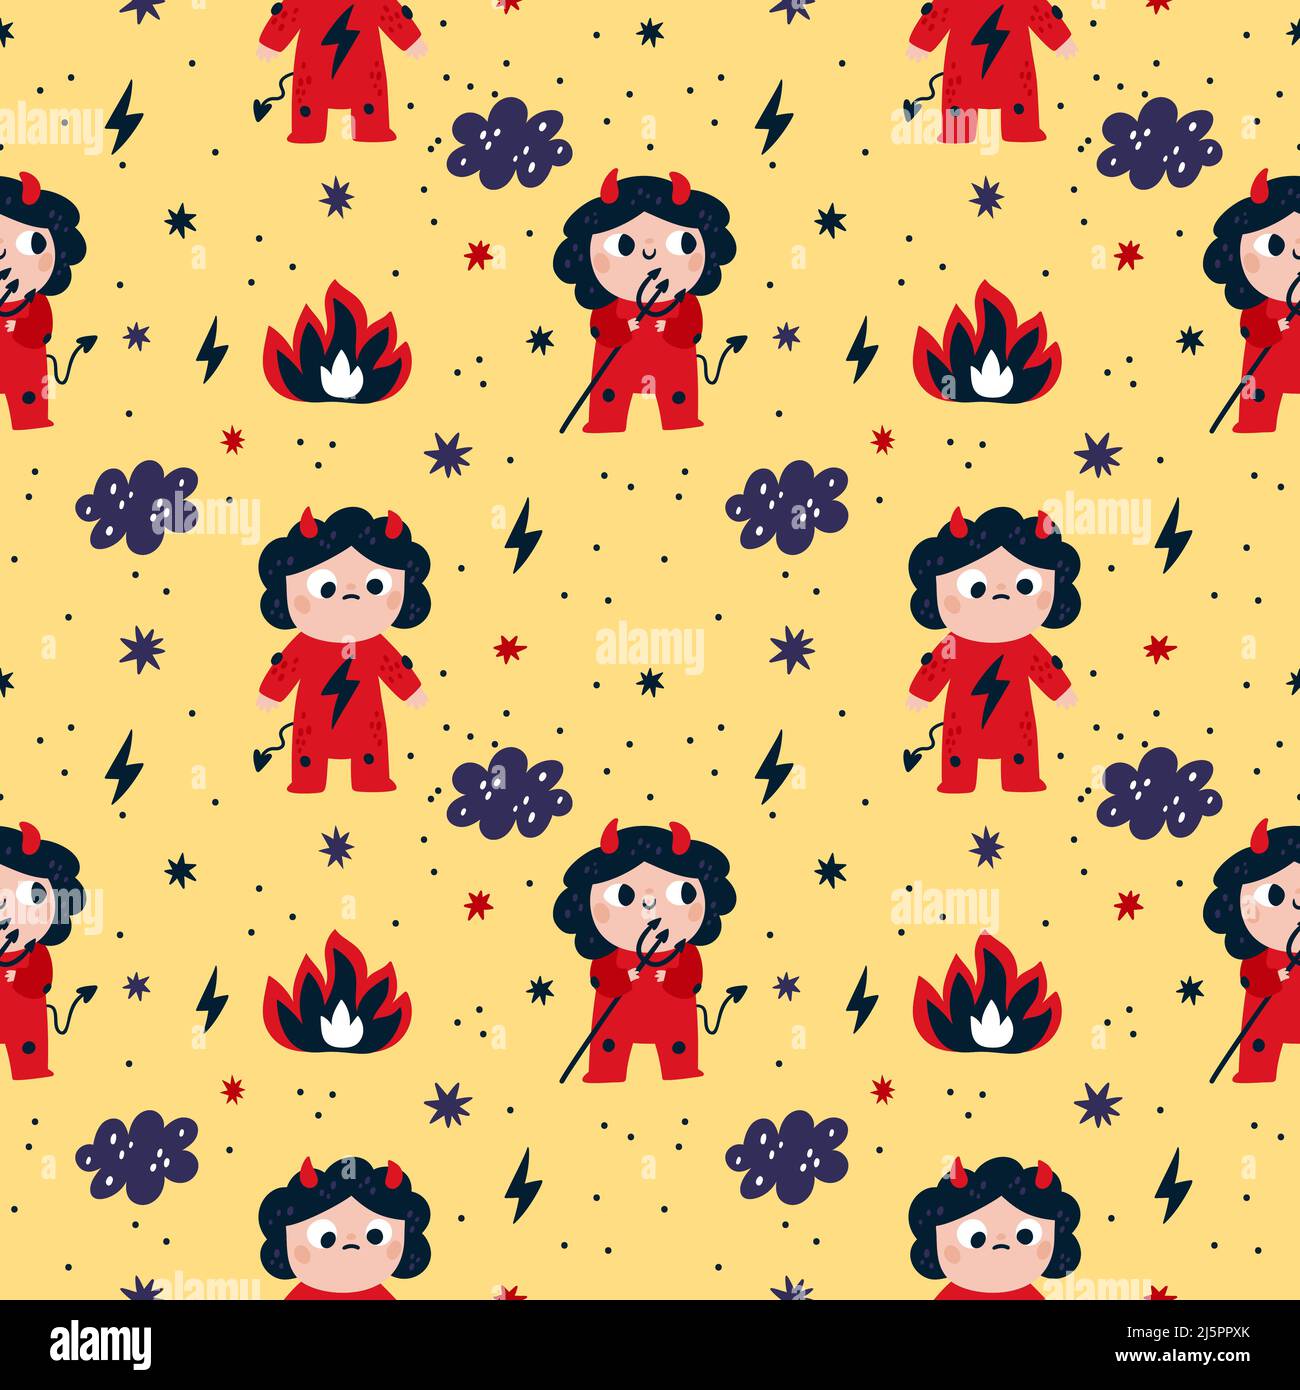 Cute devils seamless pattern. Little funny kids in red costumes with horns and demon tails. Naughty children hold tridents. Lightning and fires. Happy Stock Vector